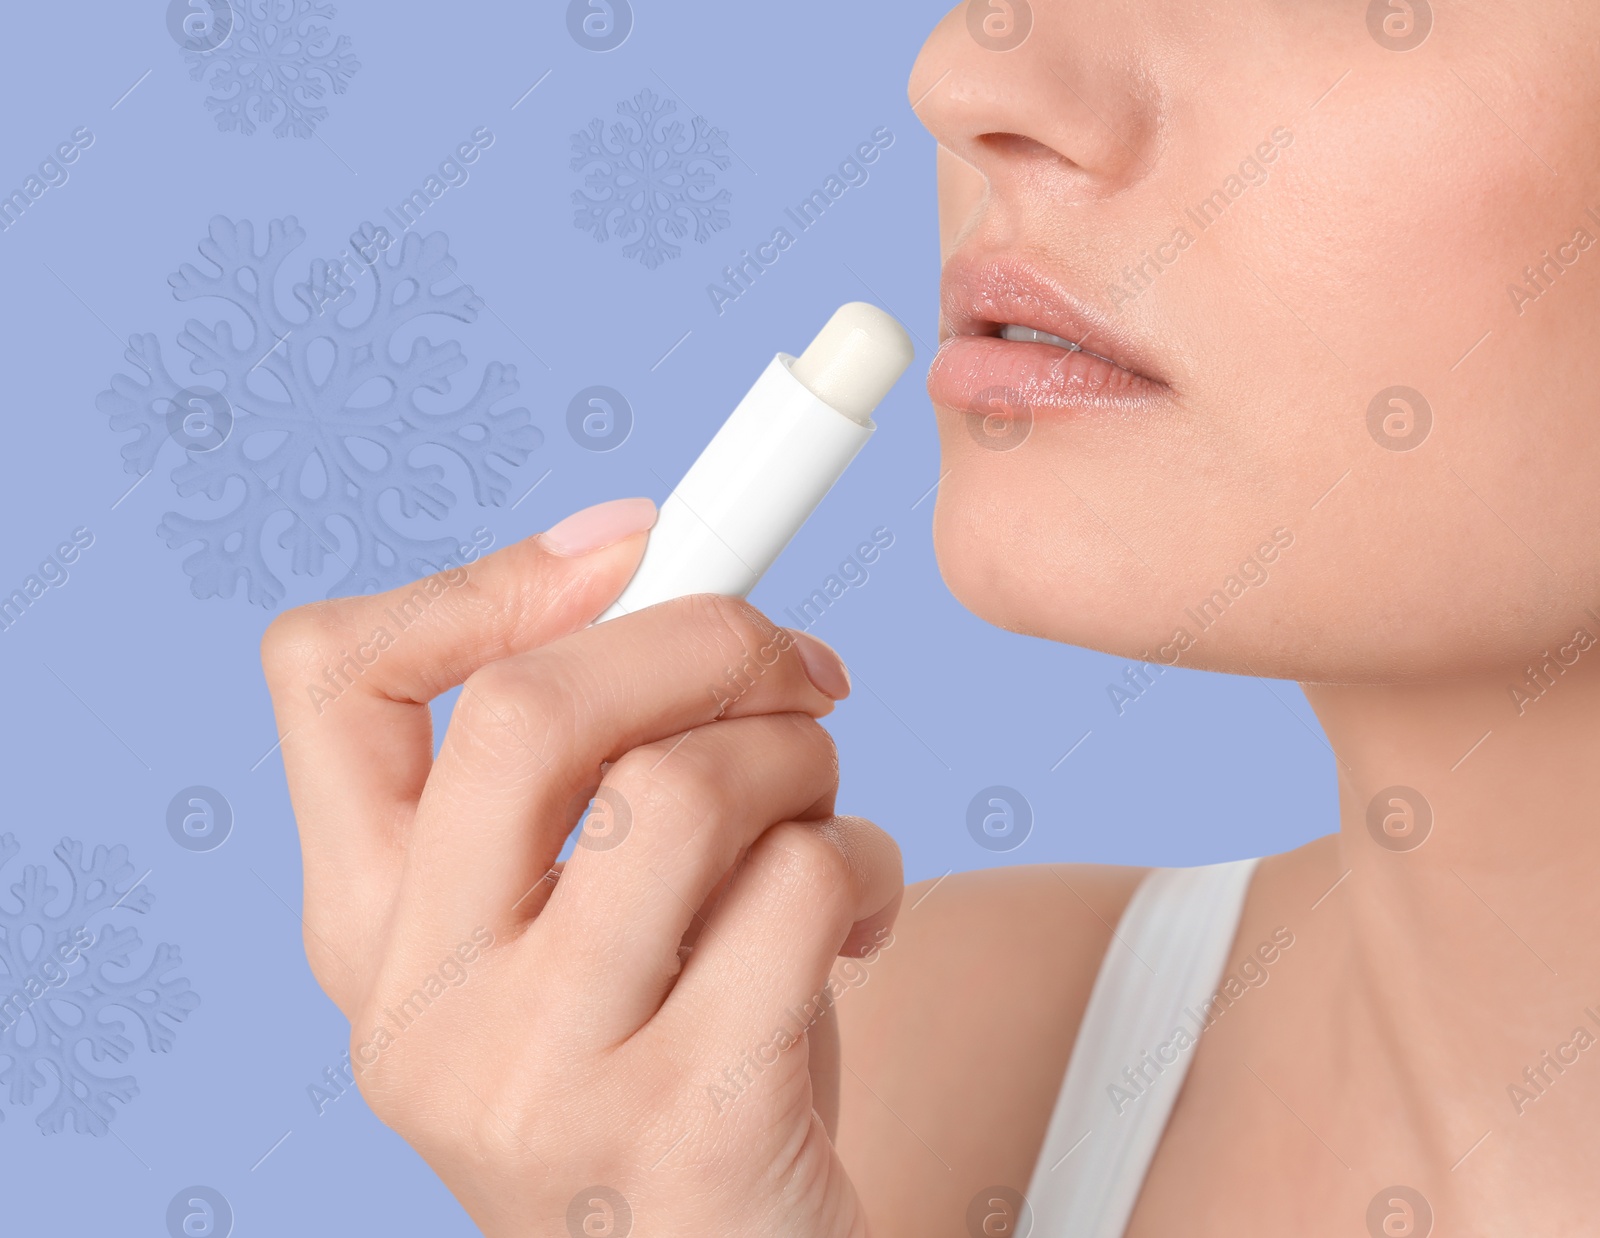 Image of Winter skin care. Woman applying lip balm, closeup. Snowflakes on pale purple background